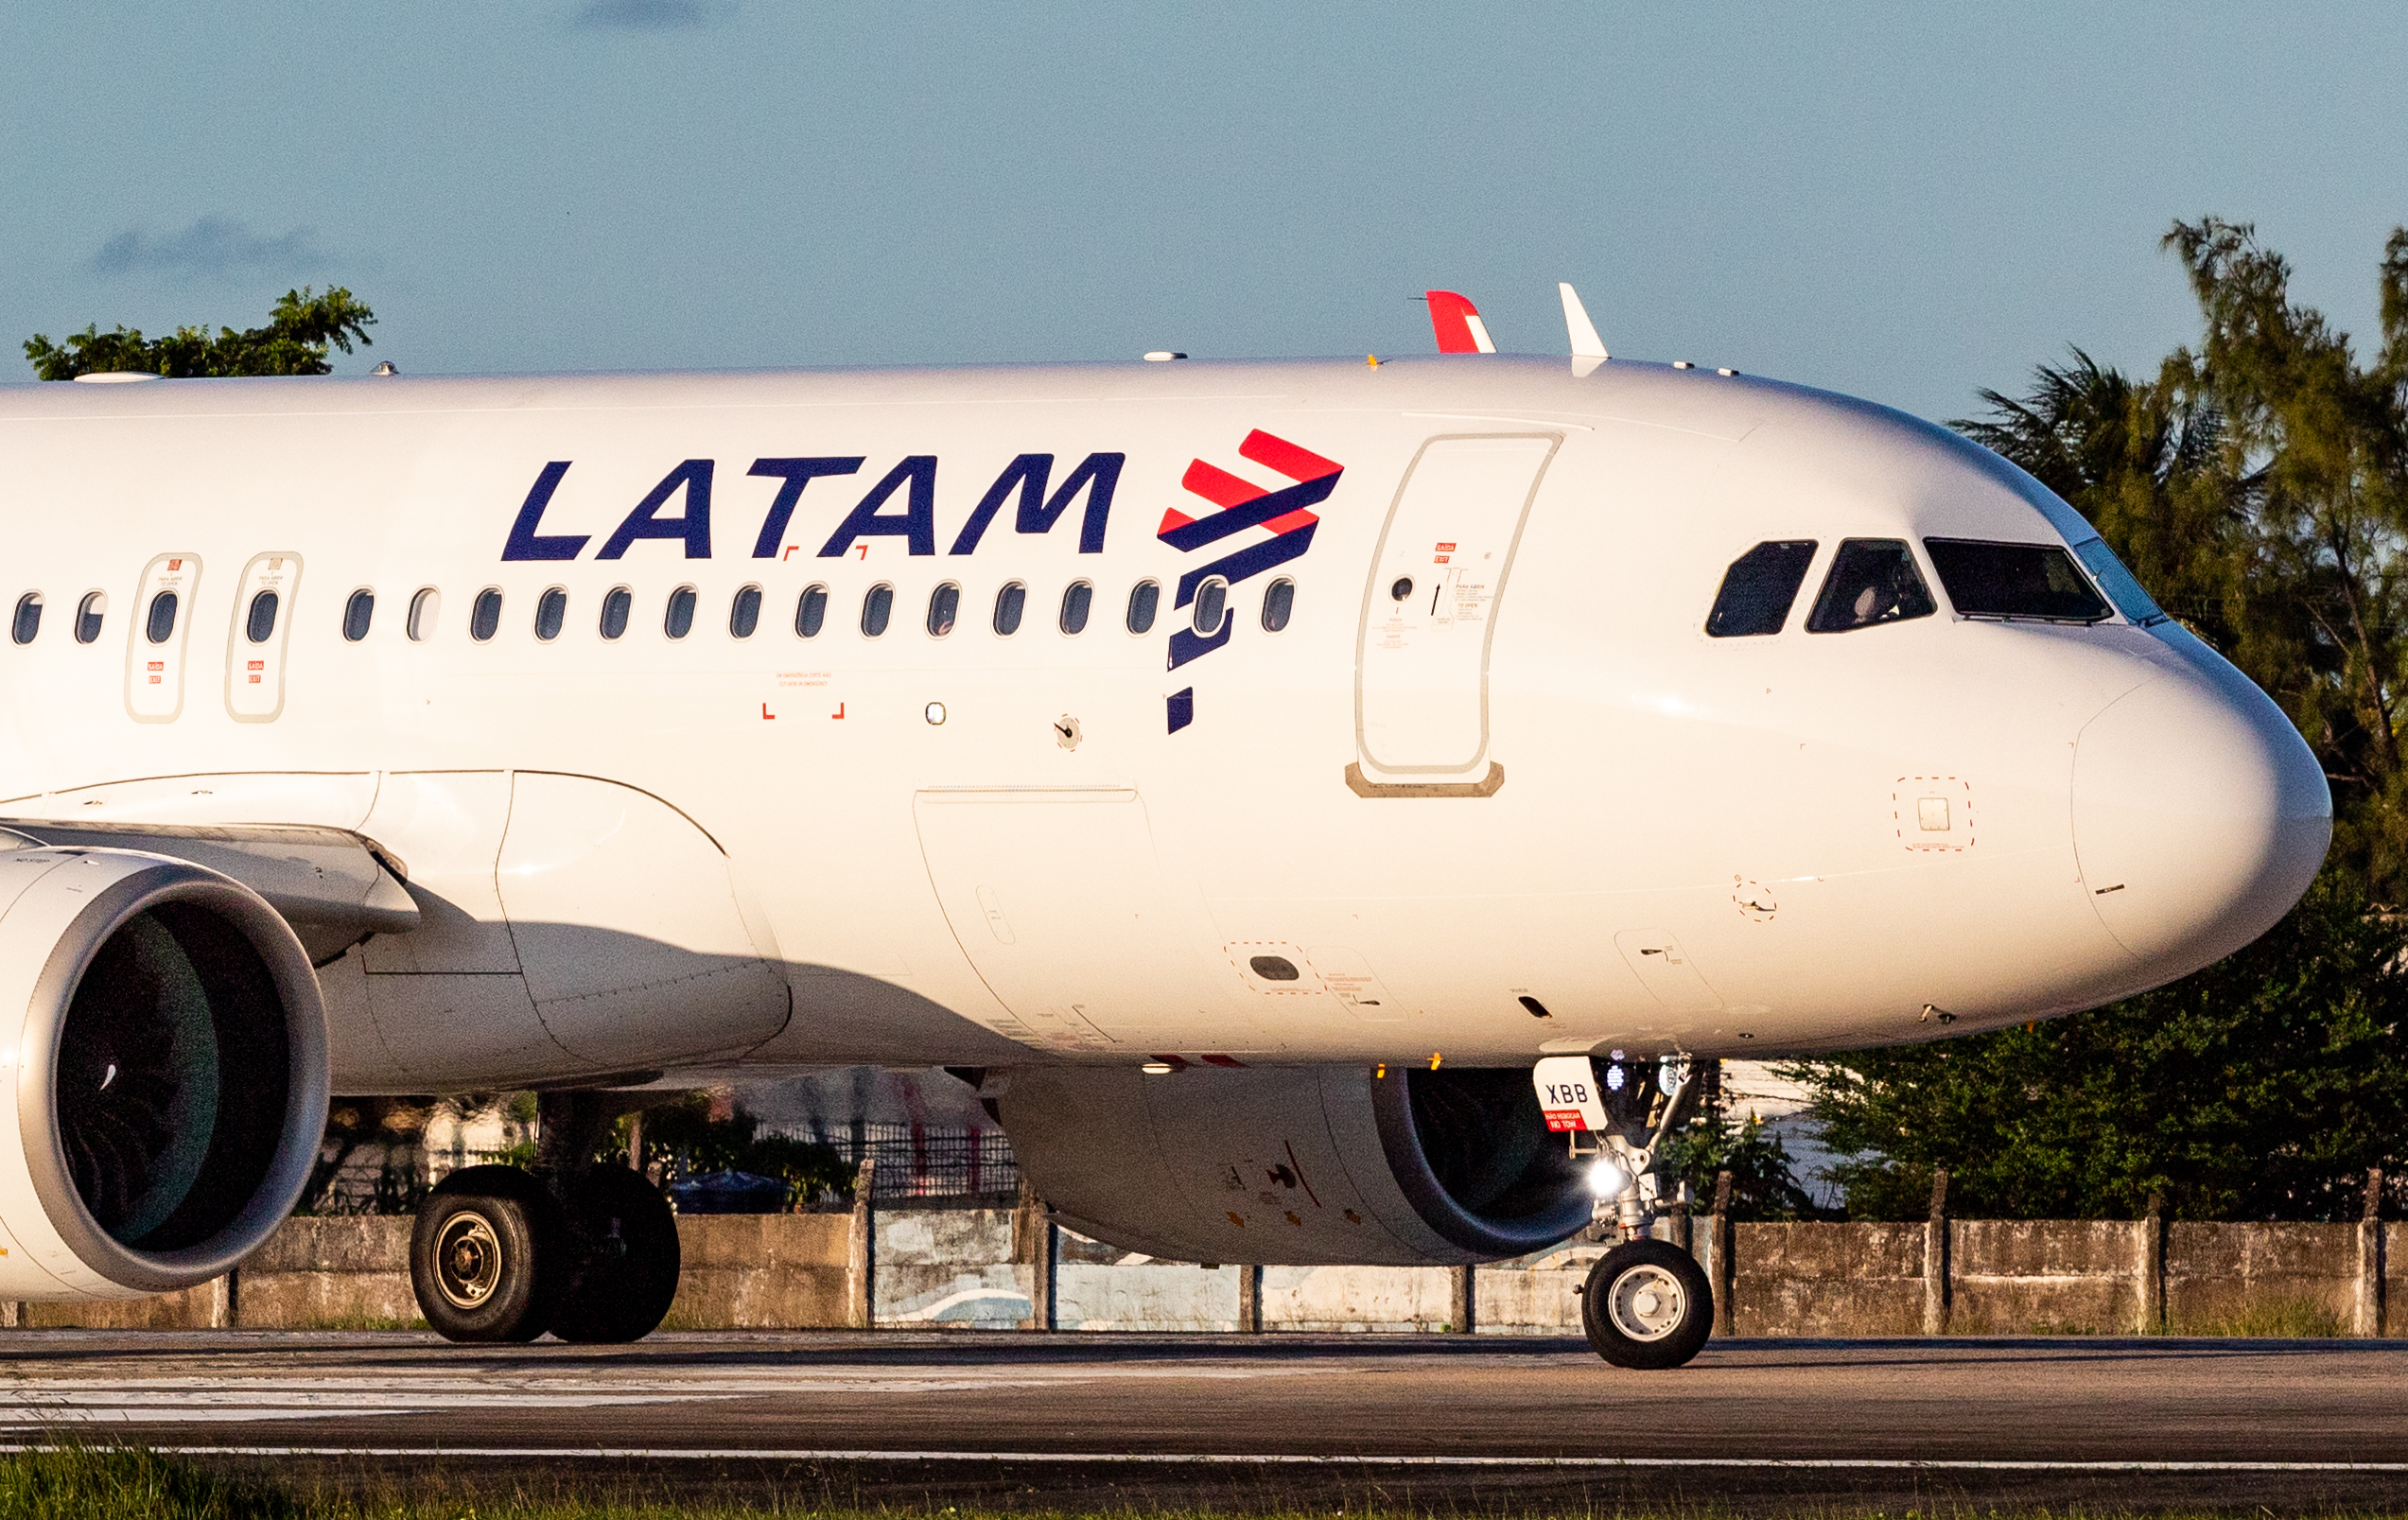 PR-XBB - Airbus A320 NEO - LATAM Airlines - Blog do Spotter